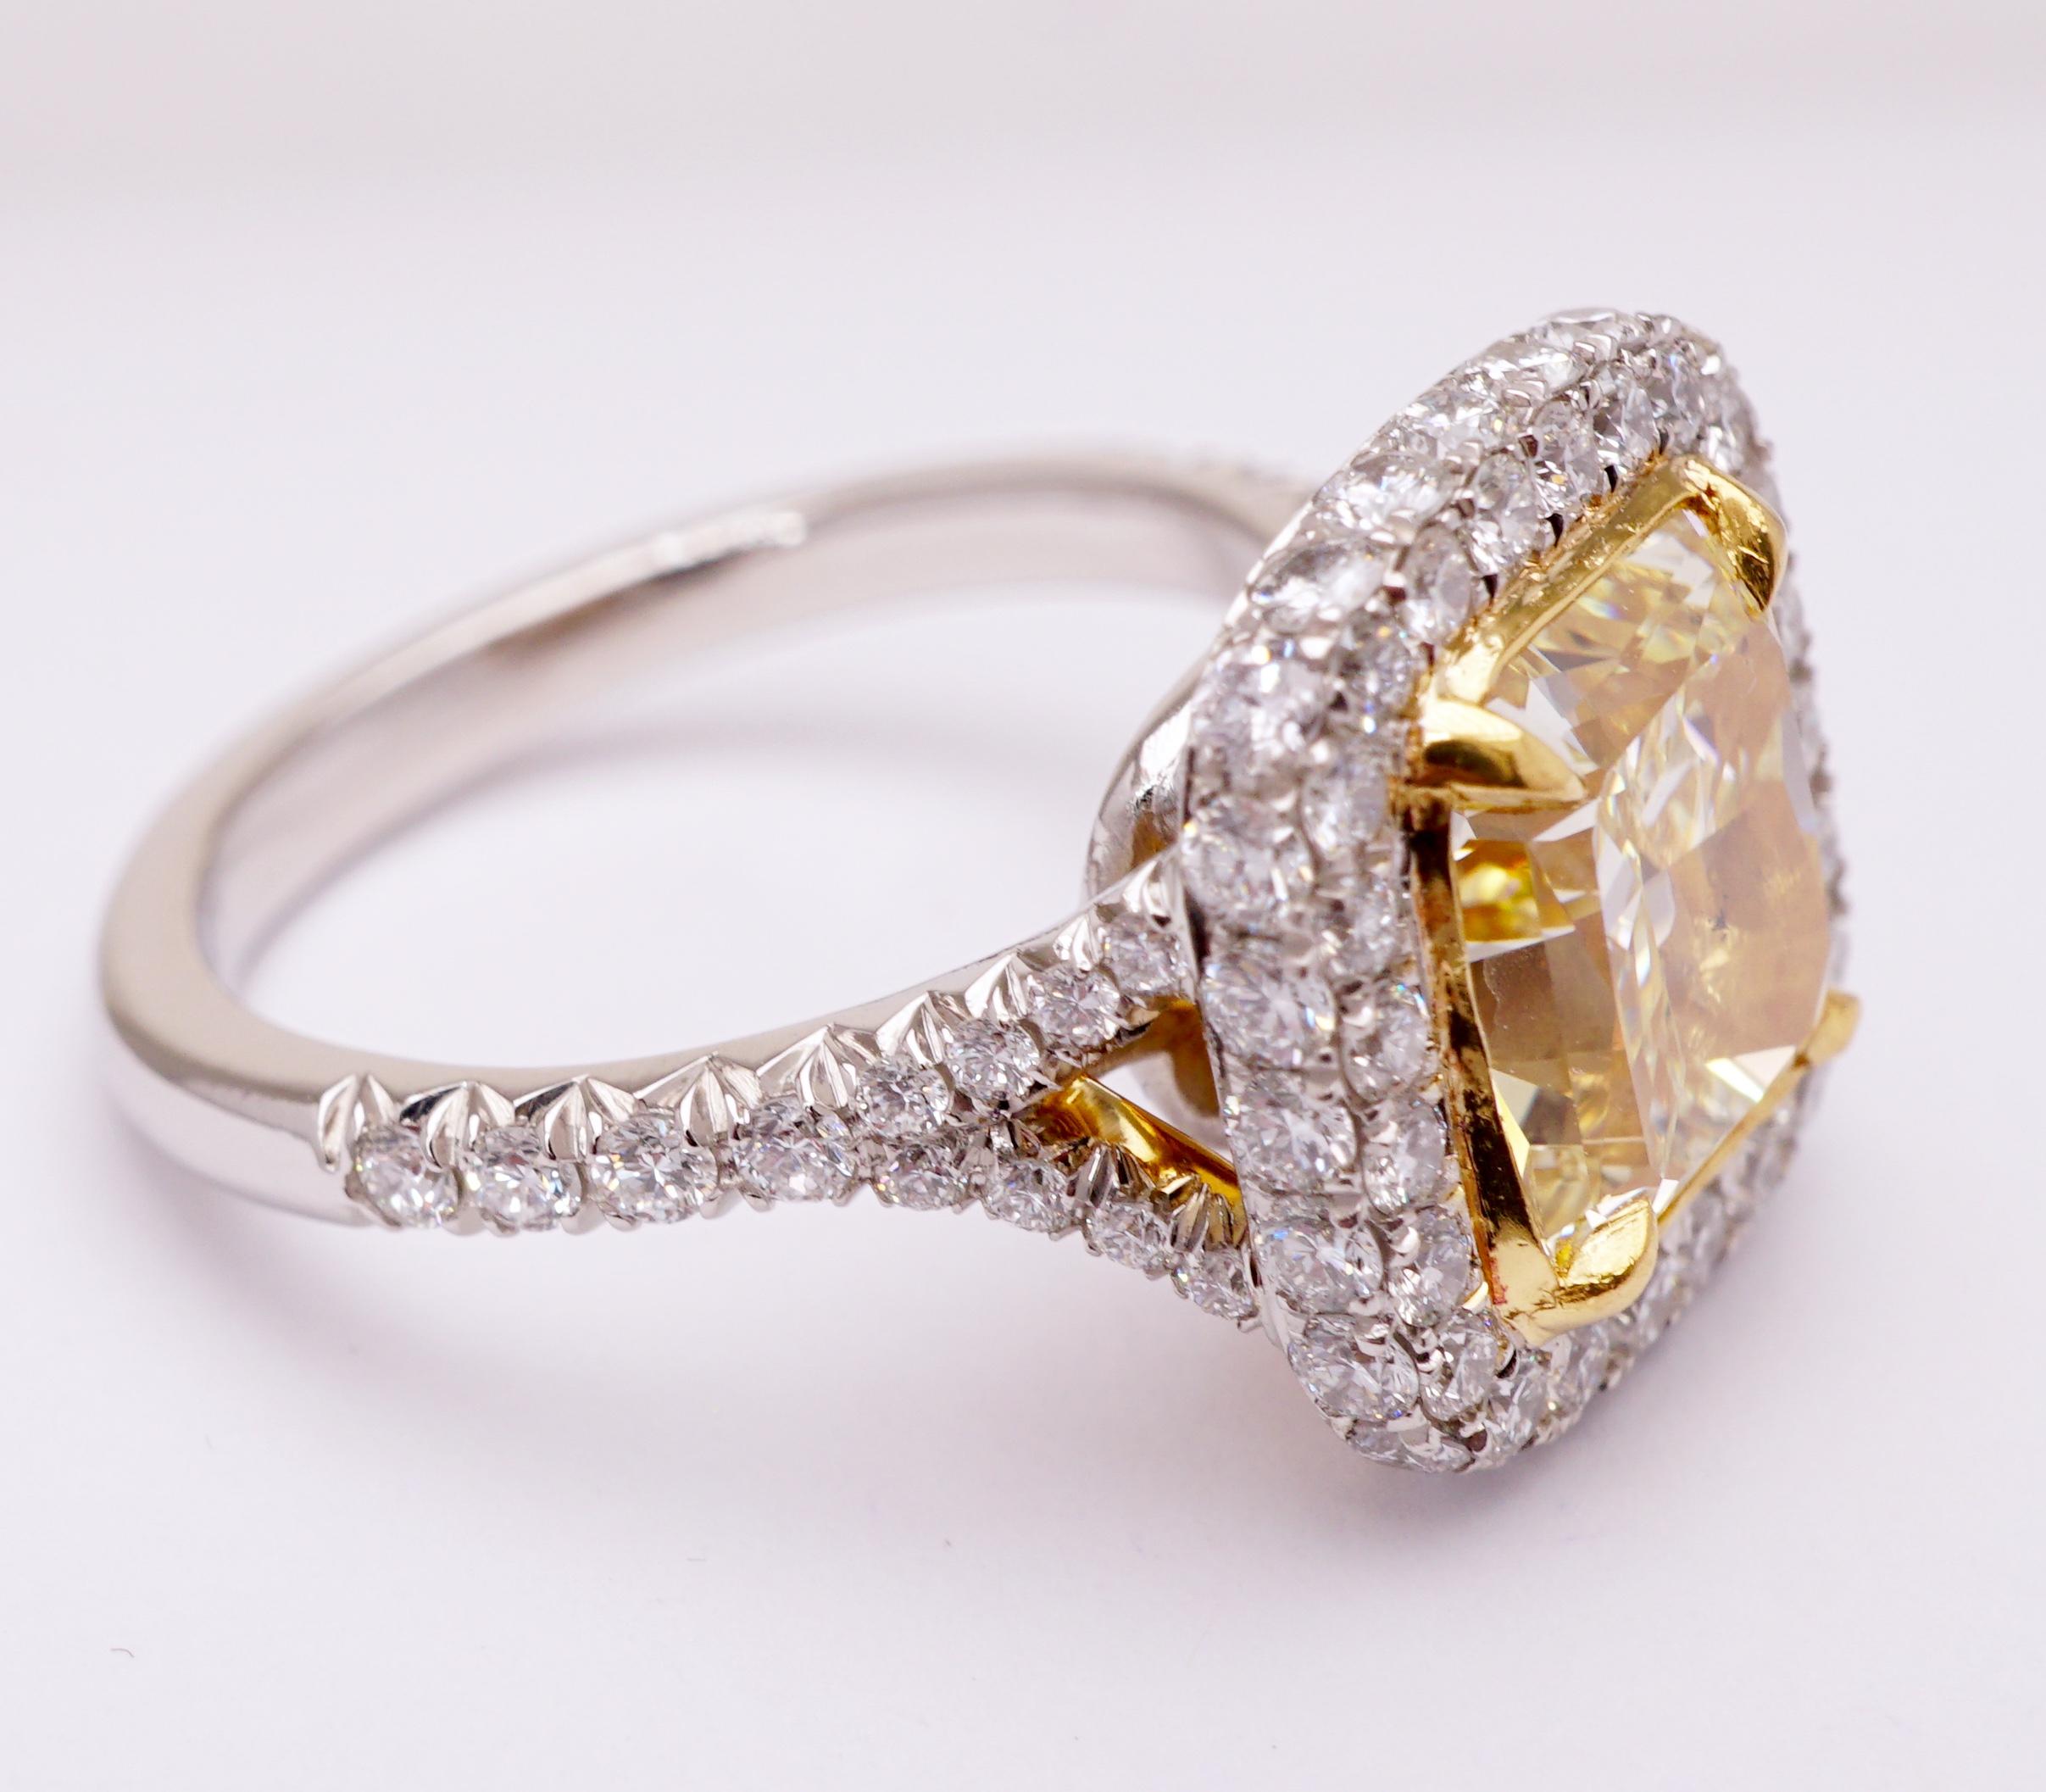 Radiant Cut Certified Fancy Yellow Radiant 2.84 Carat Diamond Cocktail Ring Set in Platinum For Sale